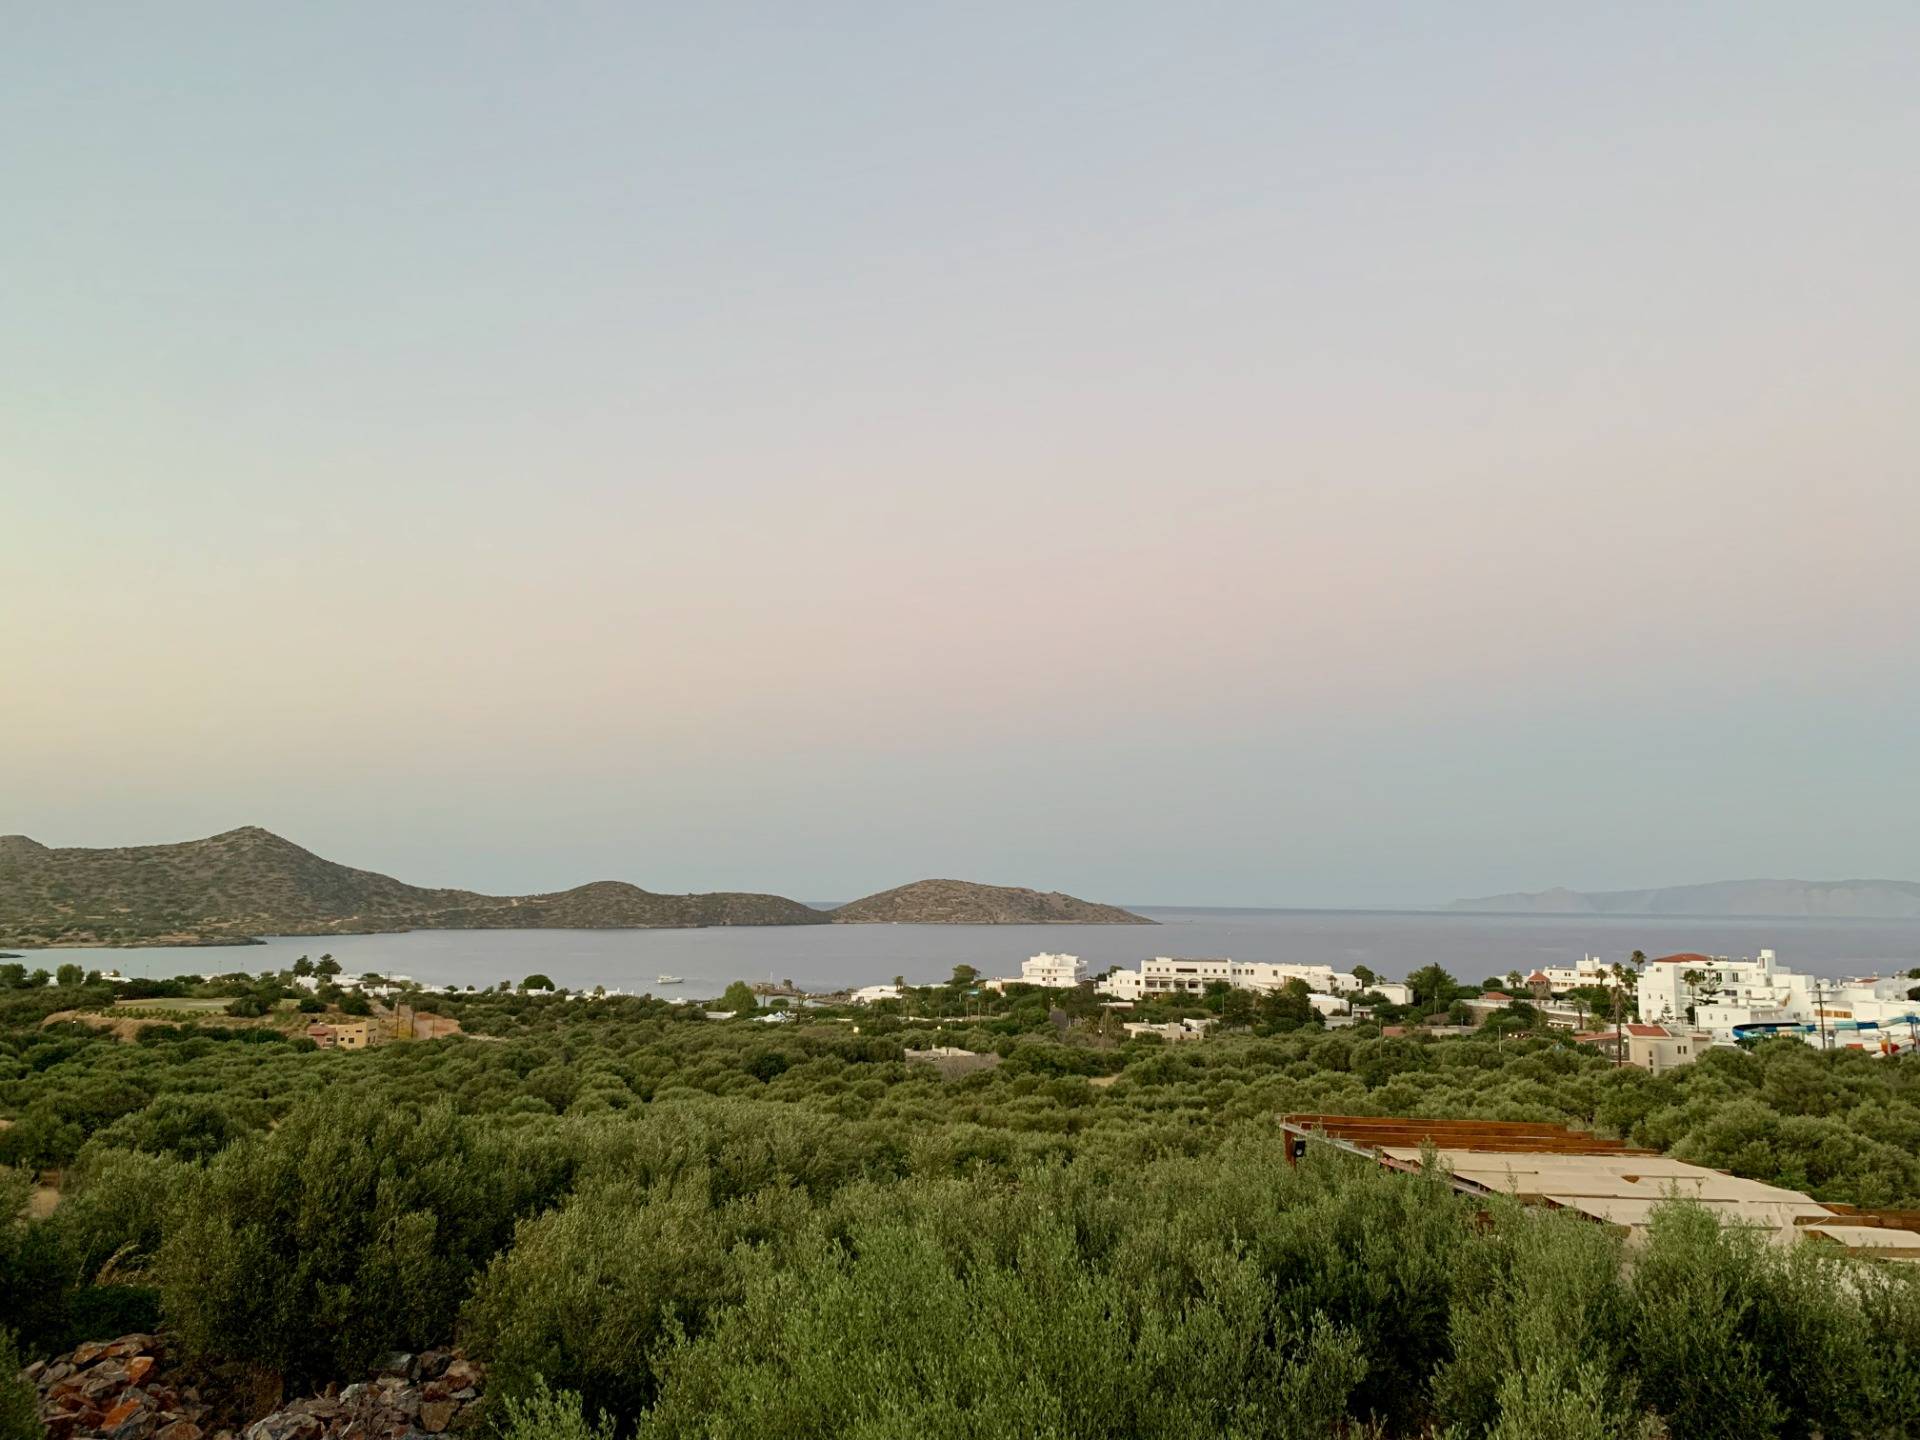 A view from the hills to the area of Elounda